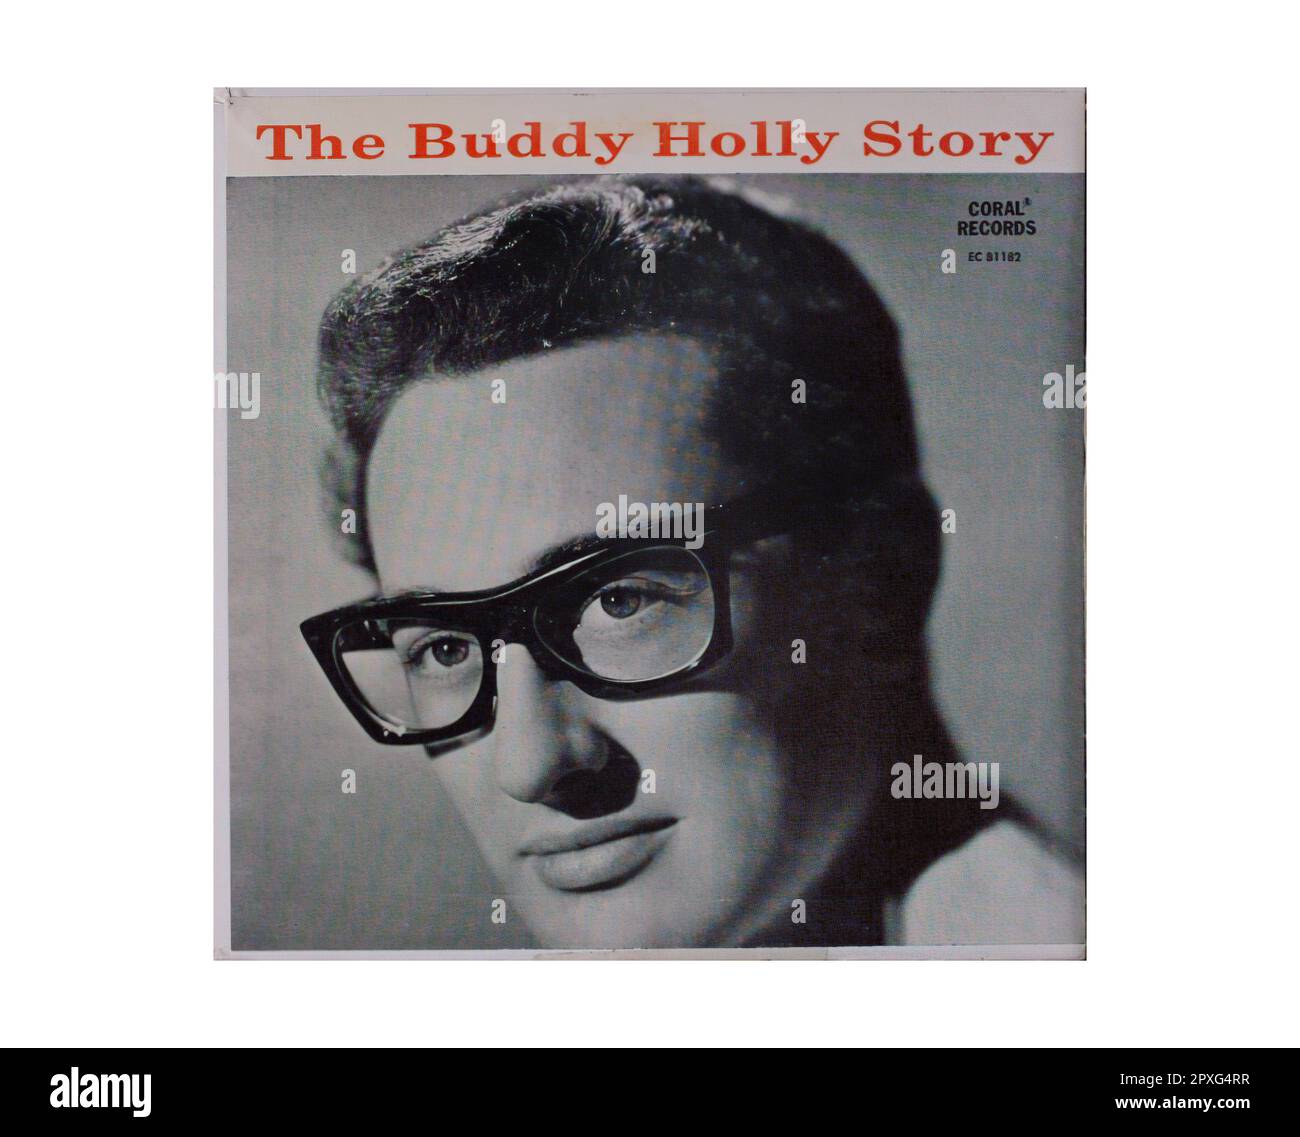 Holly Buddy 1959 01 - Extended Play 45 R.P.M - Vintage Vinyl Music Record Sleeve Banque D'Images